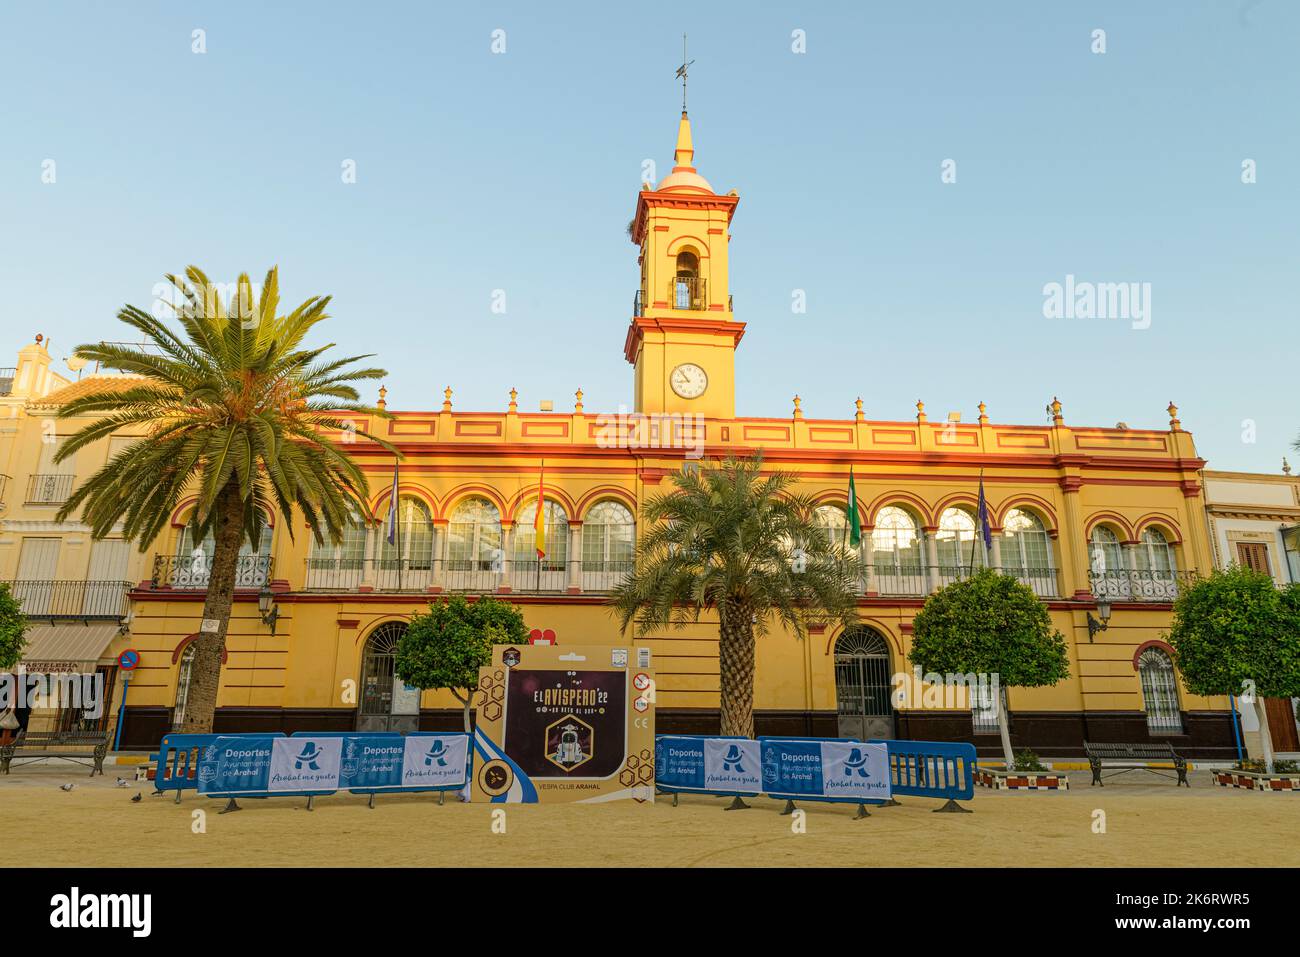 Arahal, Seville.Spain. October 15, 2022. The Plaza de la Corredera in Arahal is the meeting point for the participants in the 'El Avispero' gathering Stock Photo